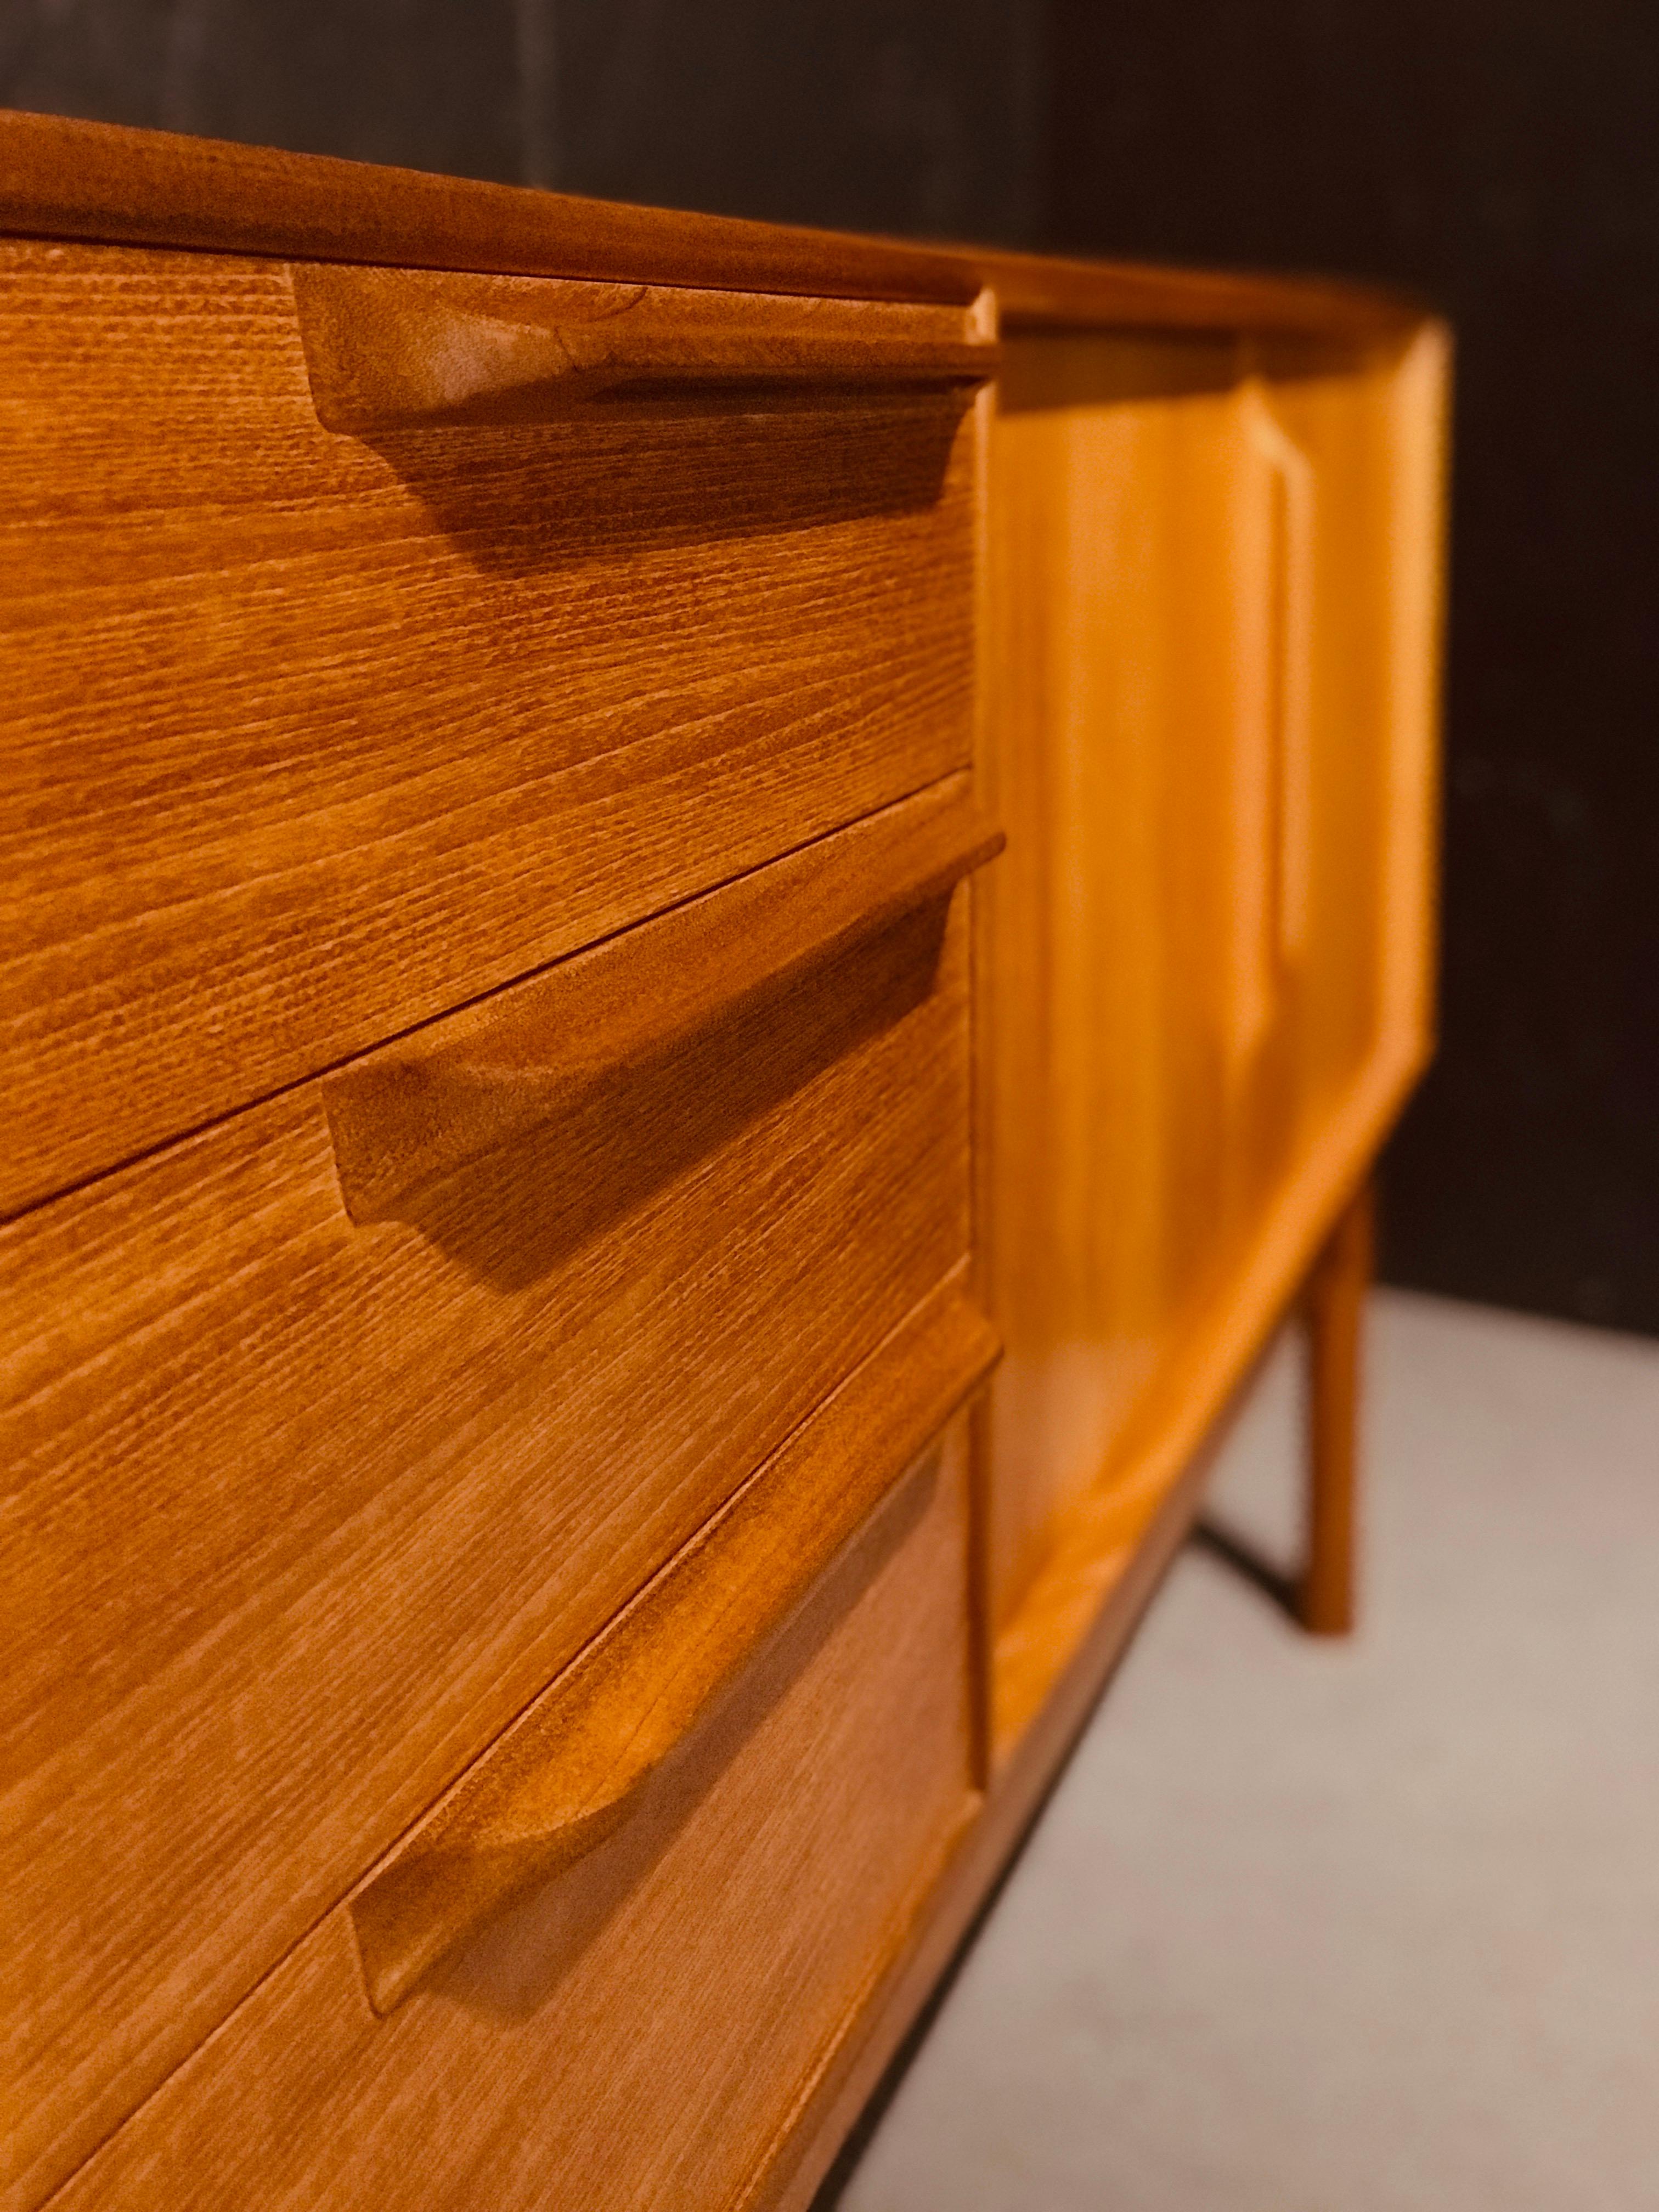 Tom robertson designed this beautiful sideboard in scotland in the early ‘70s for the well-known cabinet maker a.h. Mcintosh. The sideboard has two sections, one bank of three drawers, the top one lined up for the cutlery, and an, on its right, a